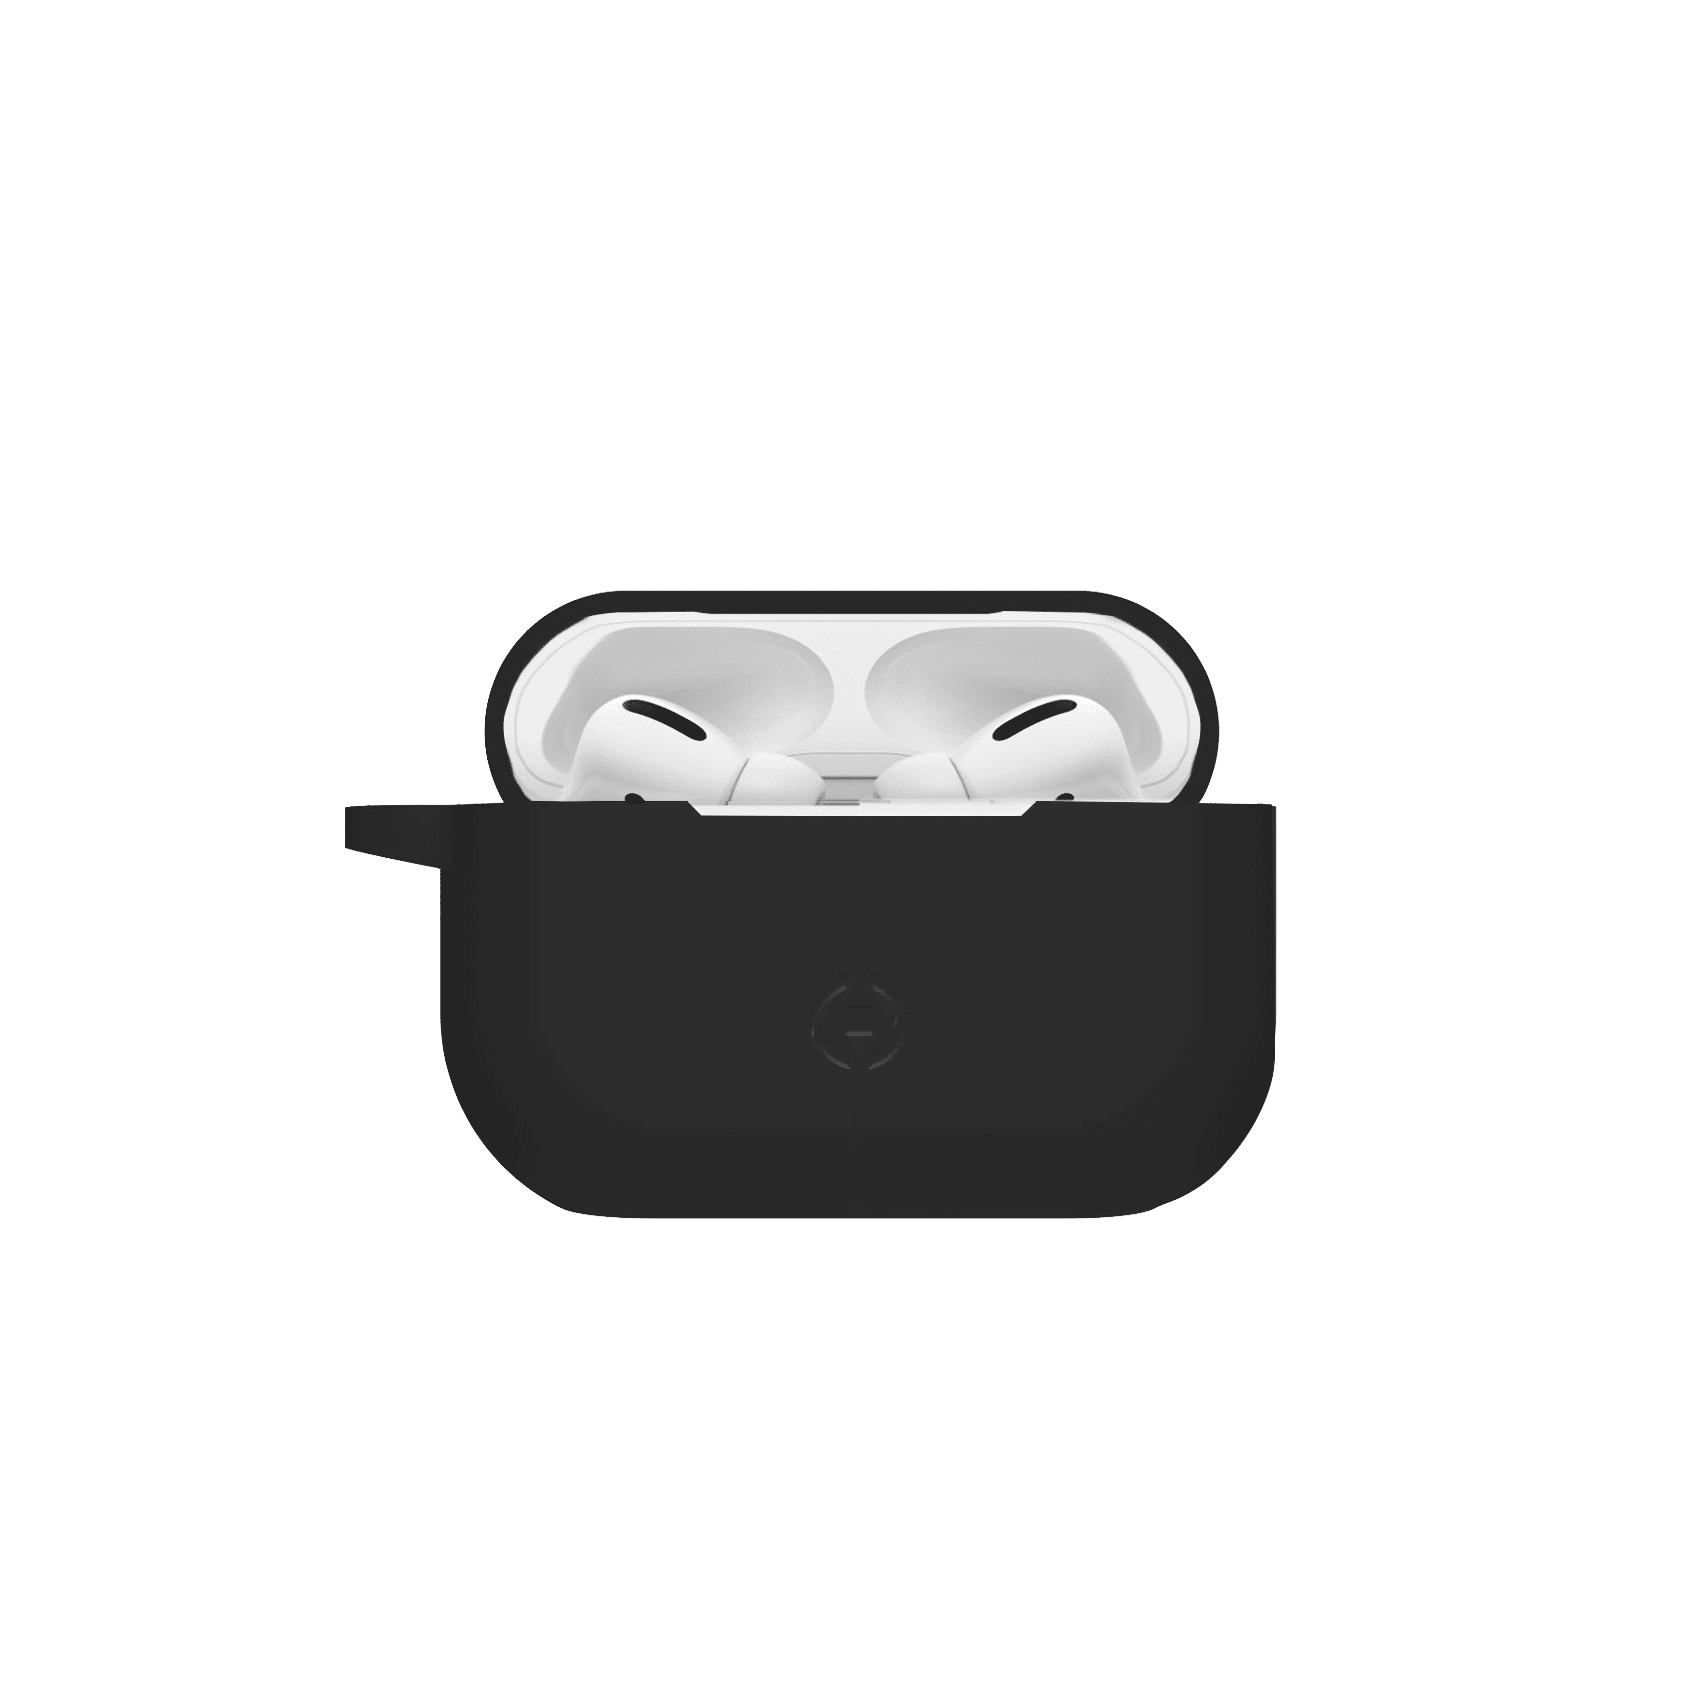 Celly AirPods Pro Case